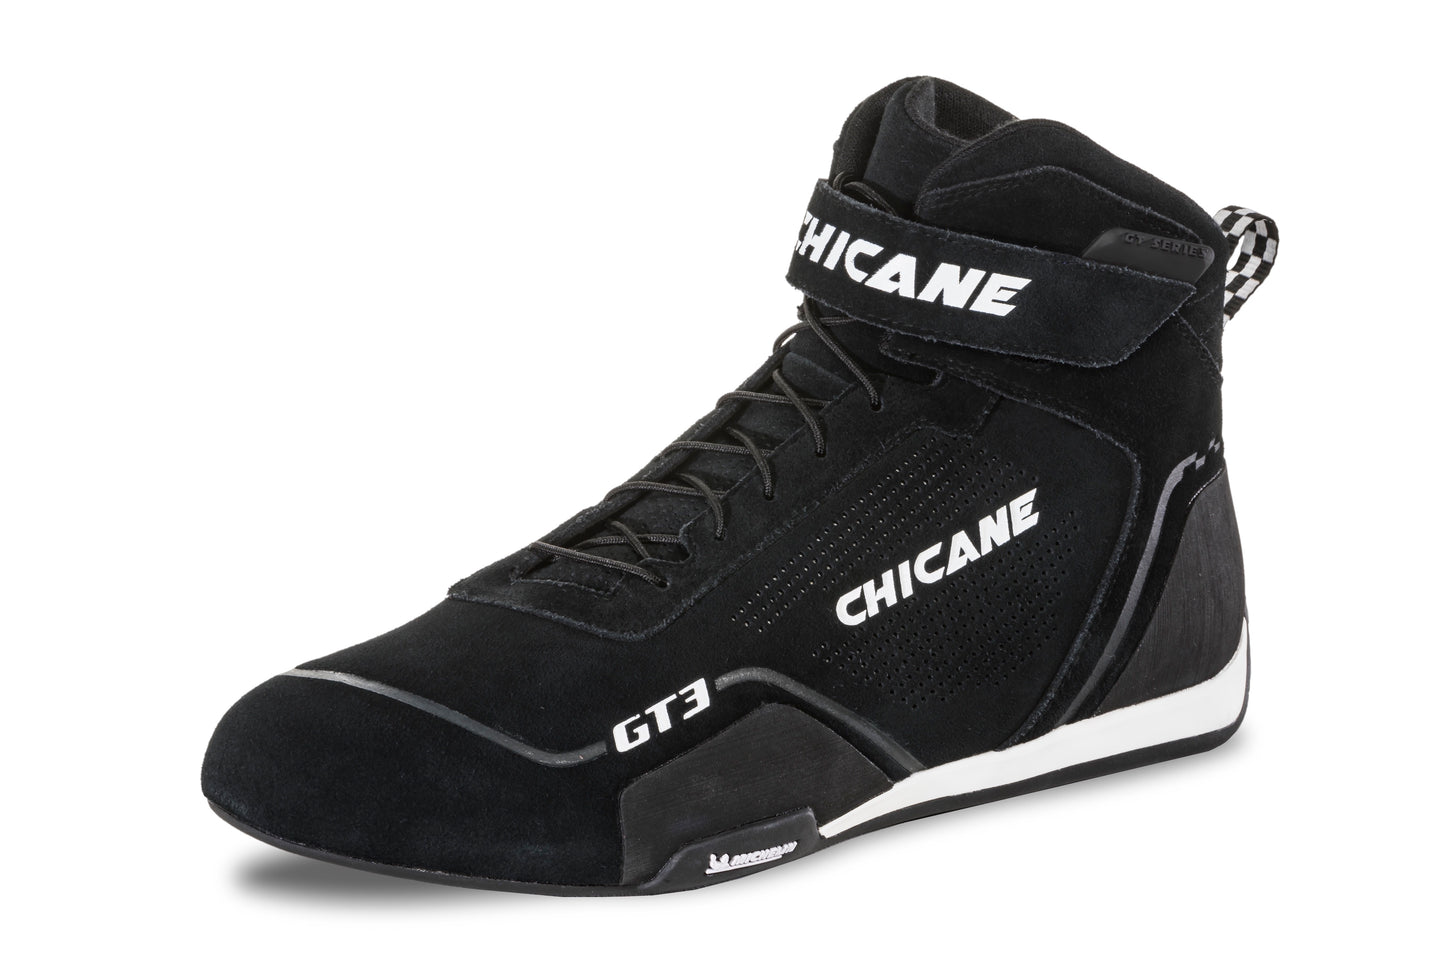 Chicane Men's GT3 - Black – Chicane - The Sole of Racing